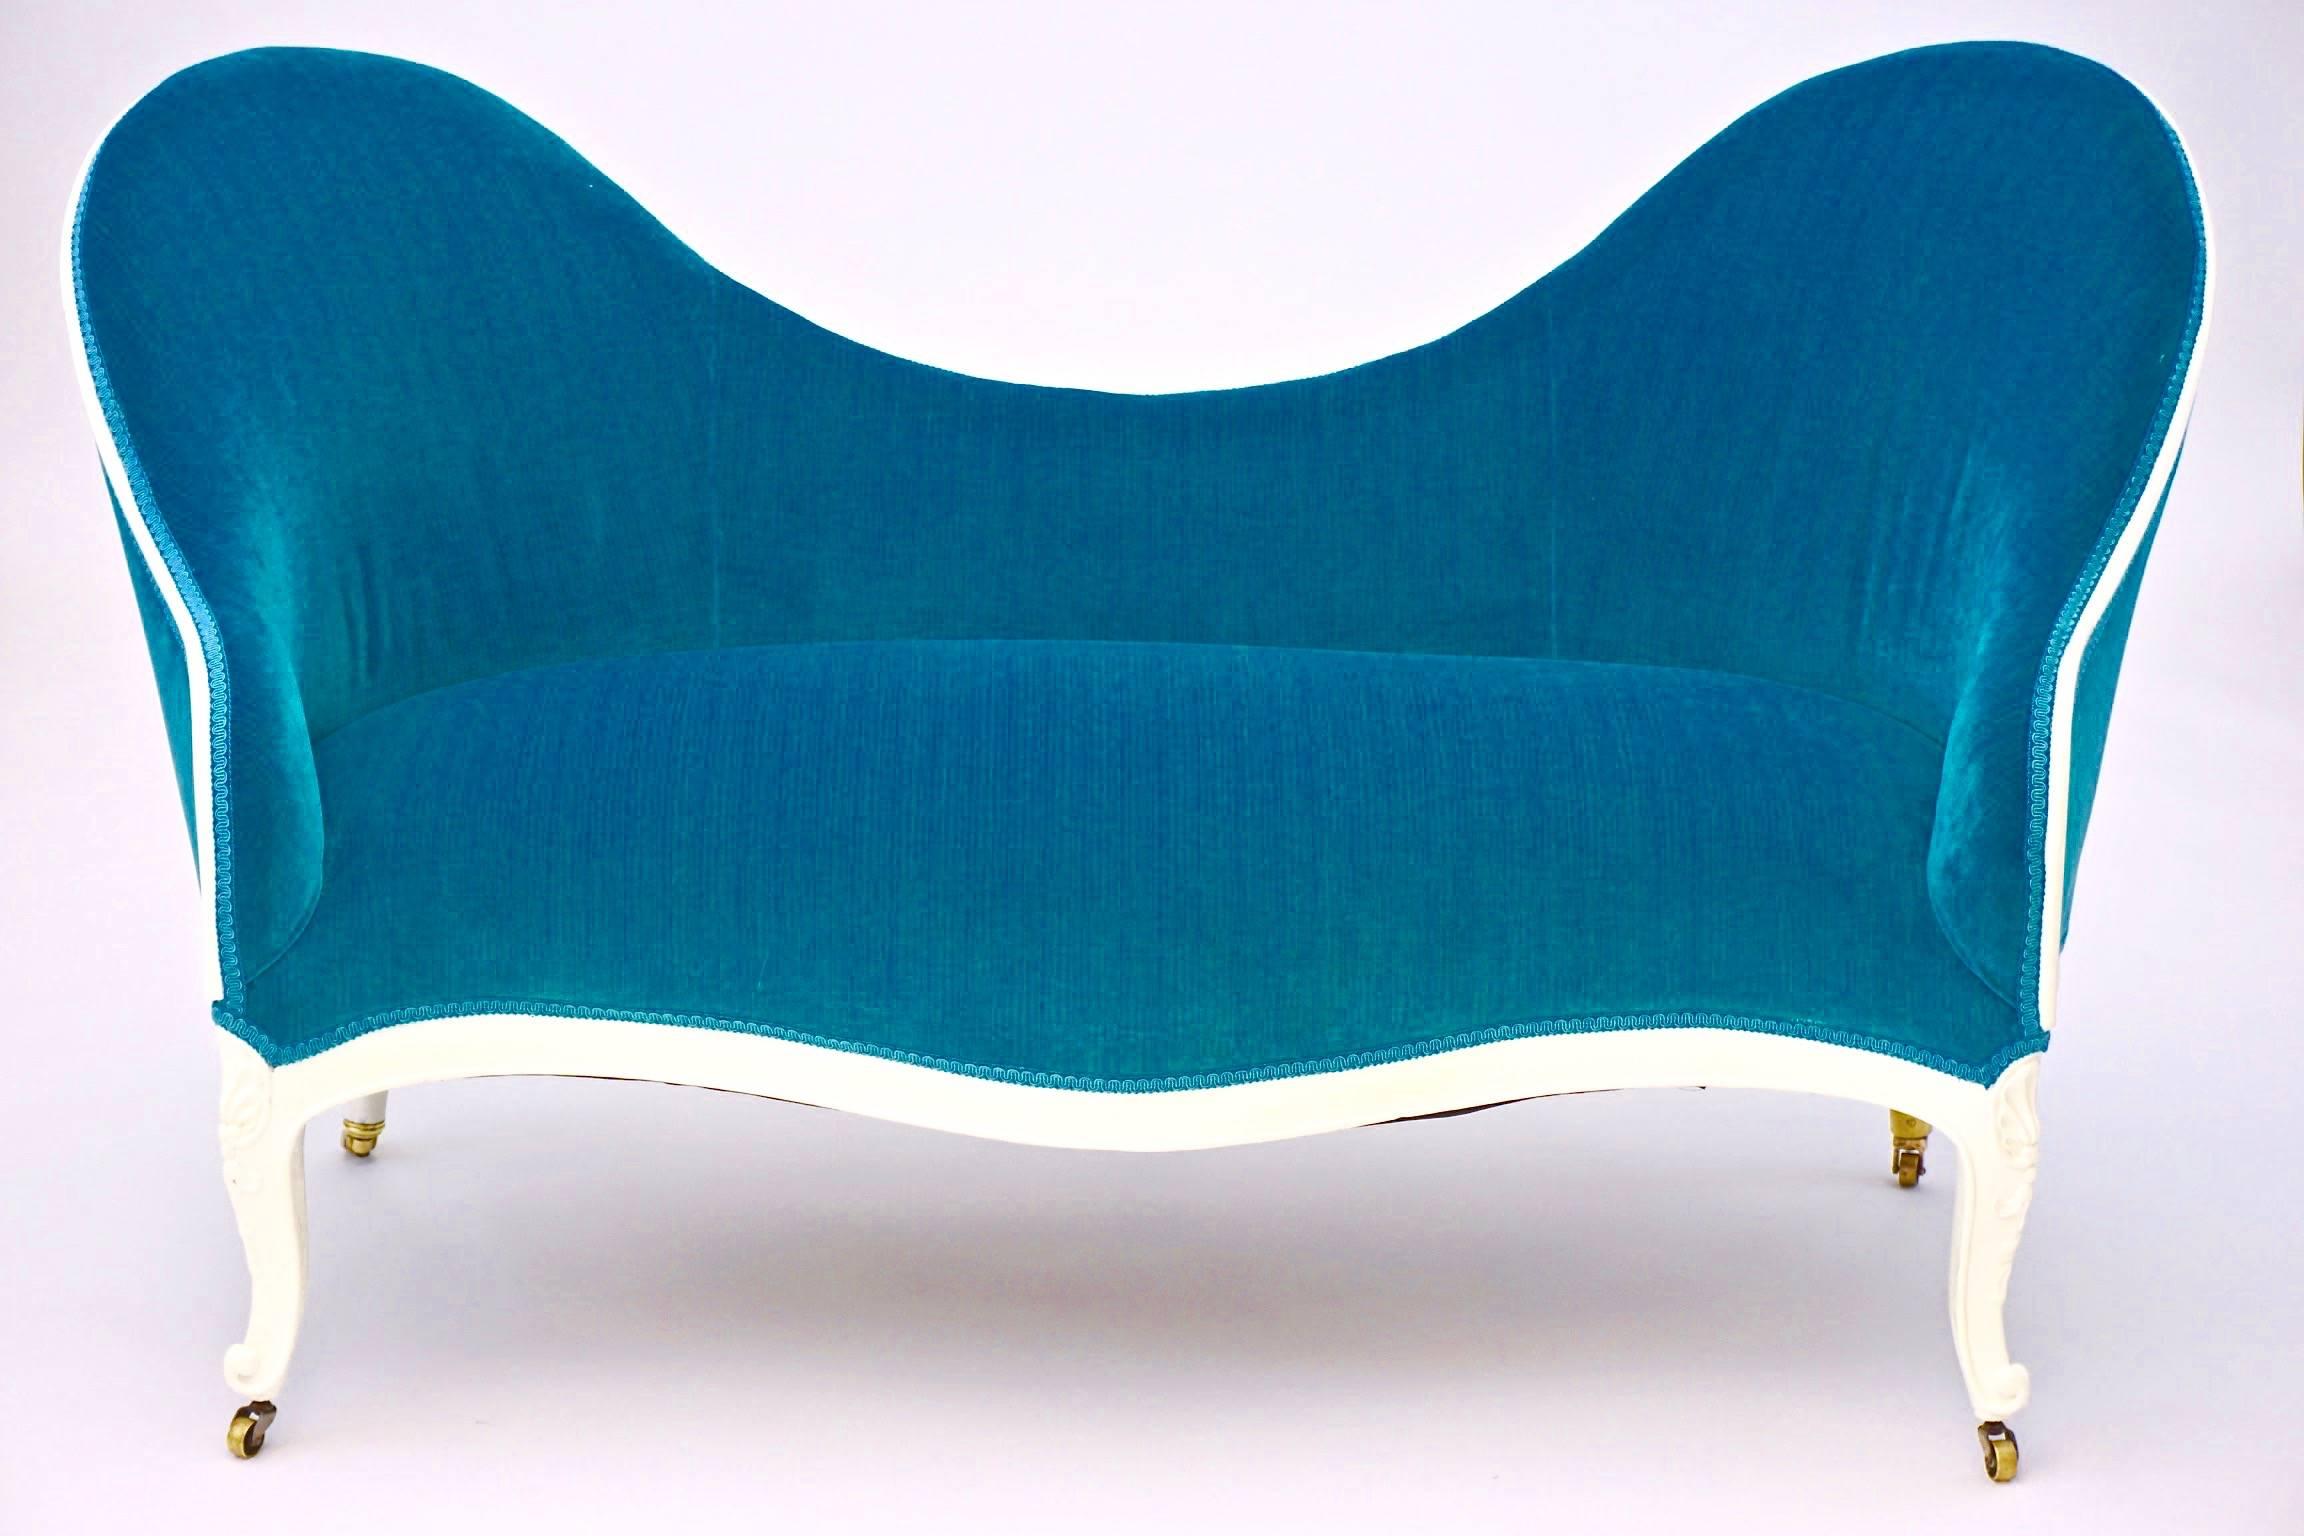 Petit Victorian Settee newly upholstered in turquoise stria velvet. White painted frame.

